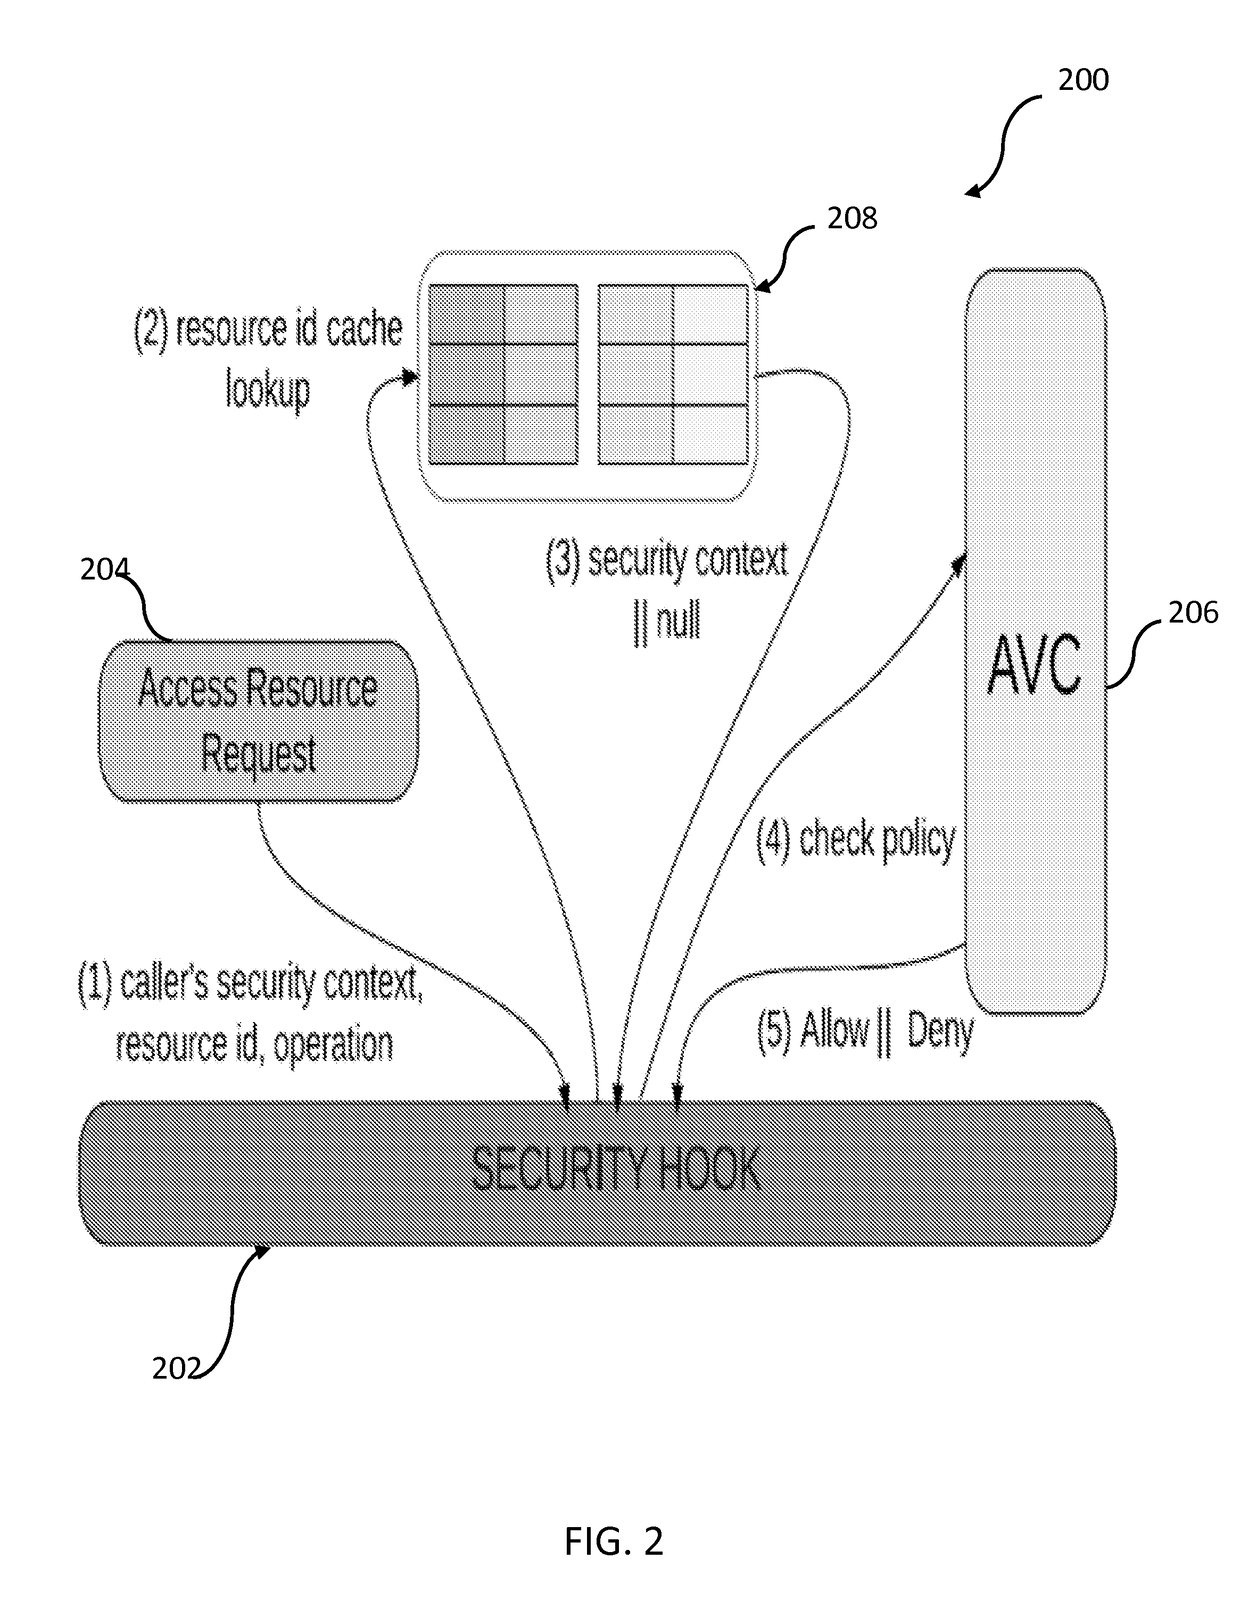 External resource control of mobile devices